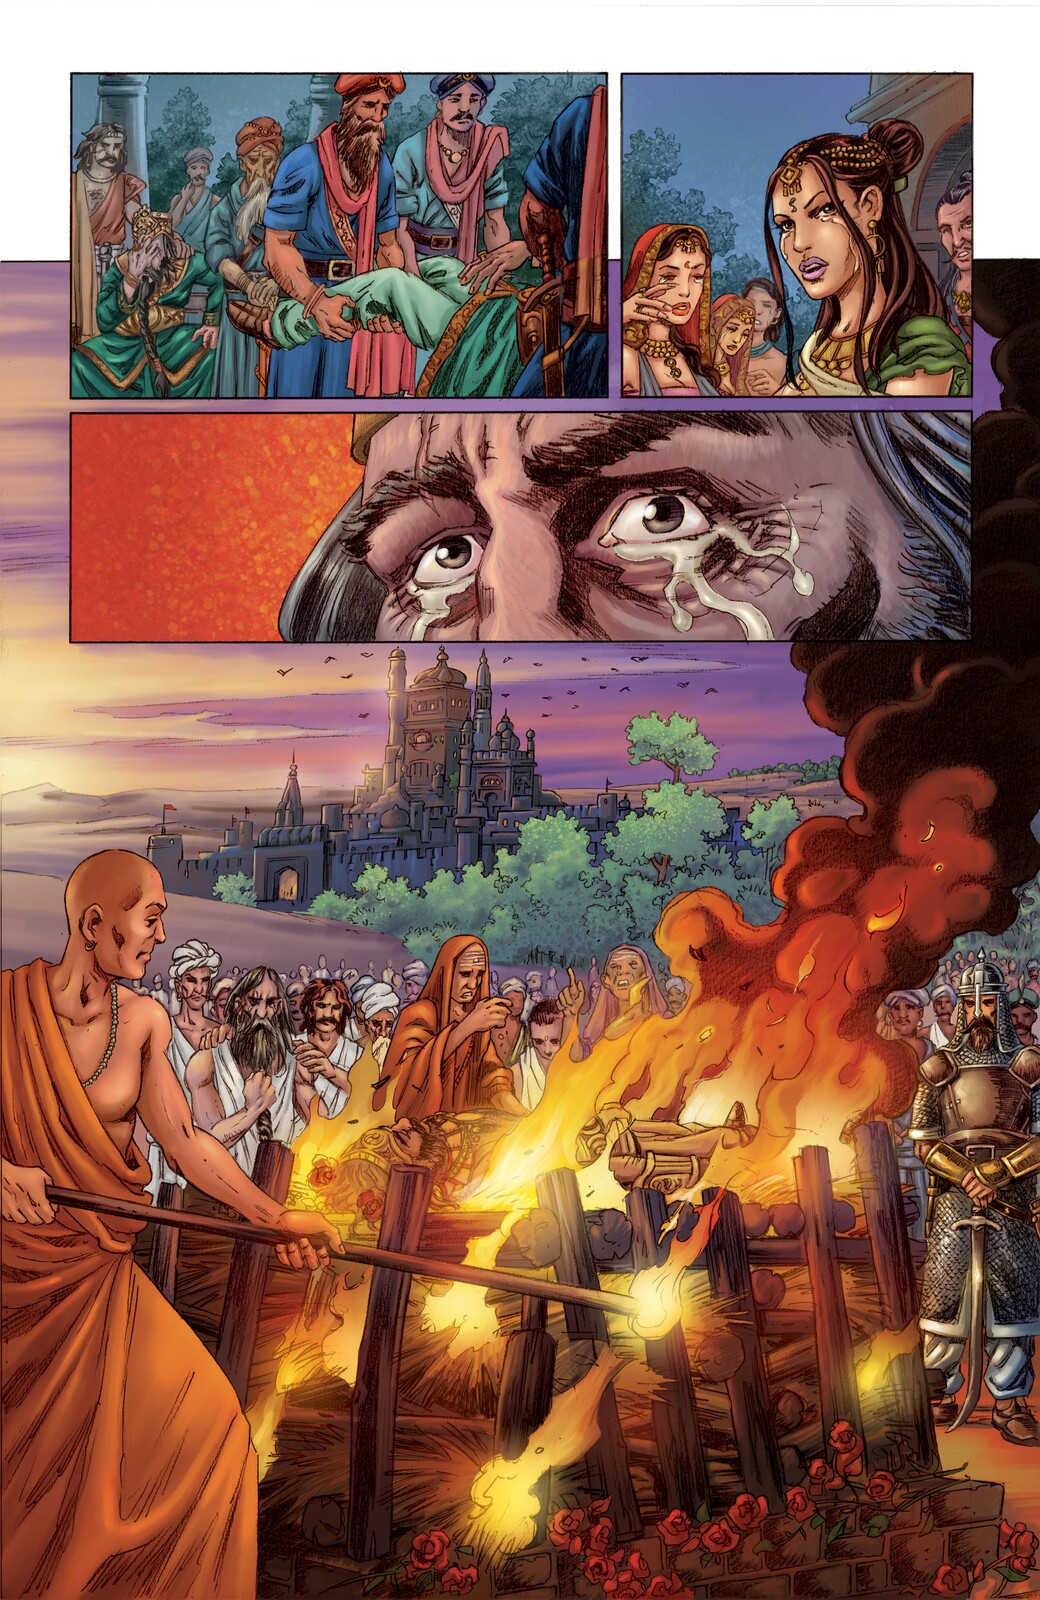 Scions of the Cursed King
Page 6, color by Santosh Pillewar